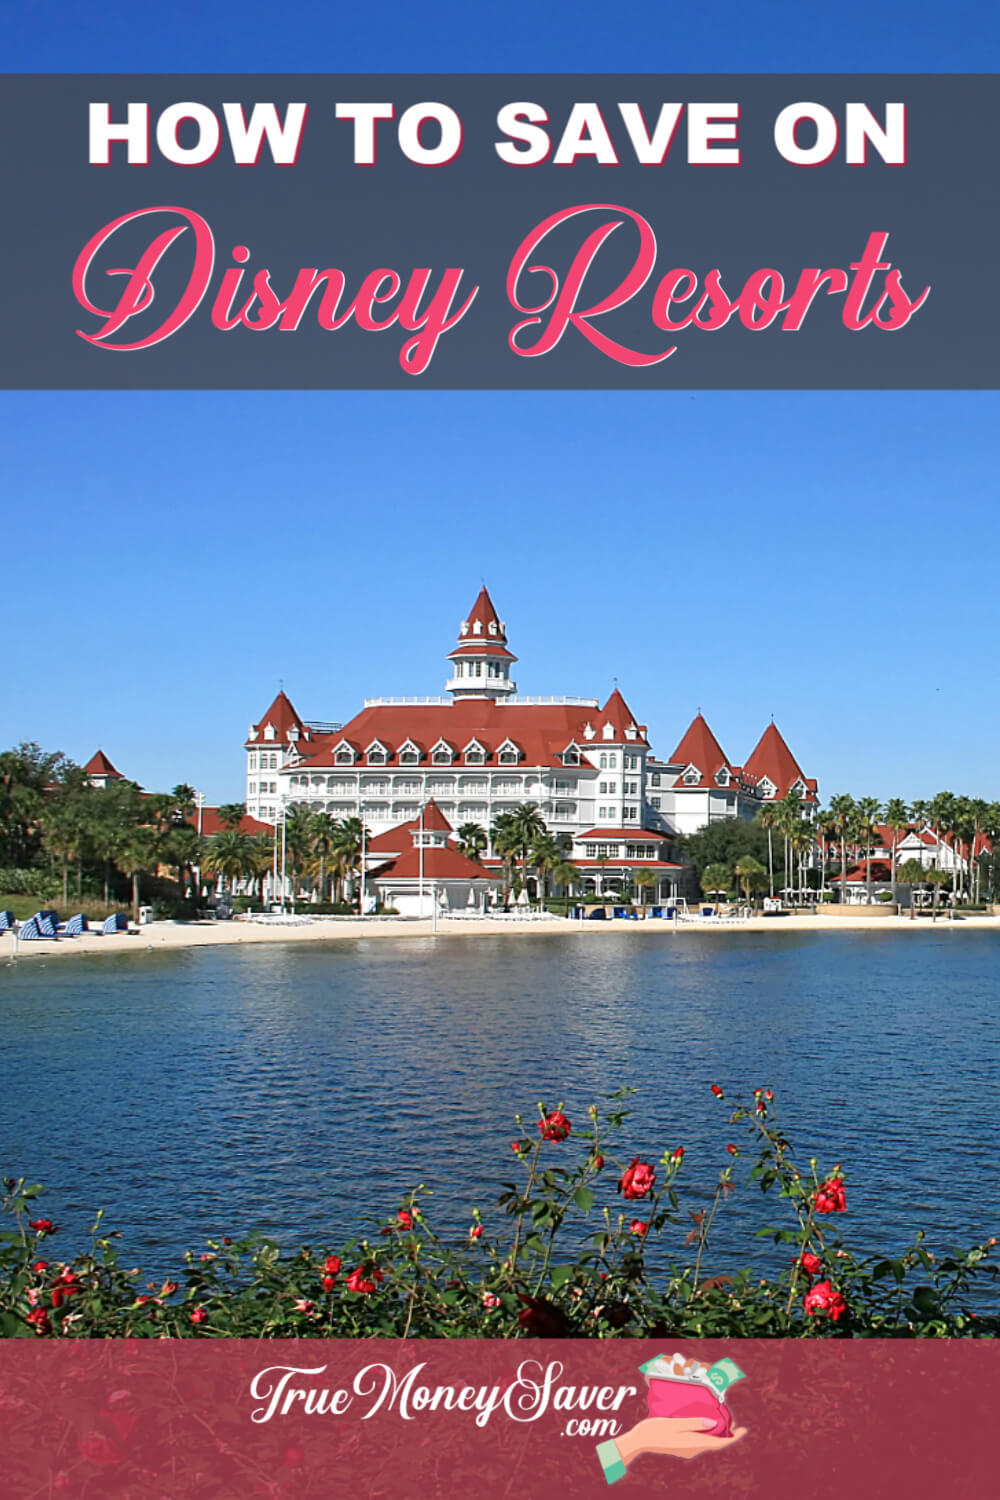 How To Save On Disney Resorts